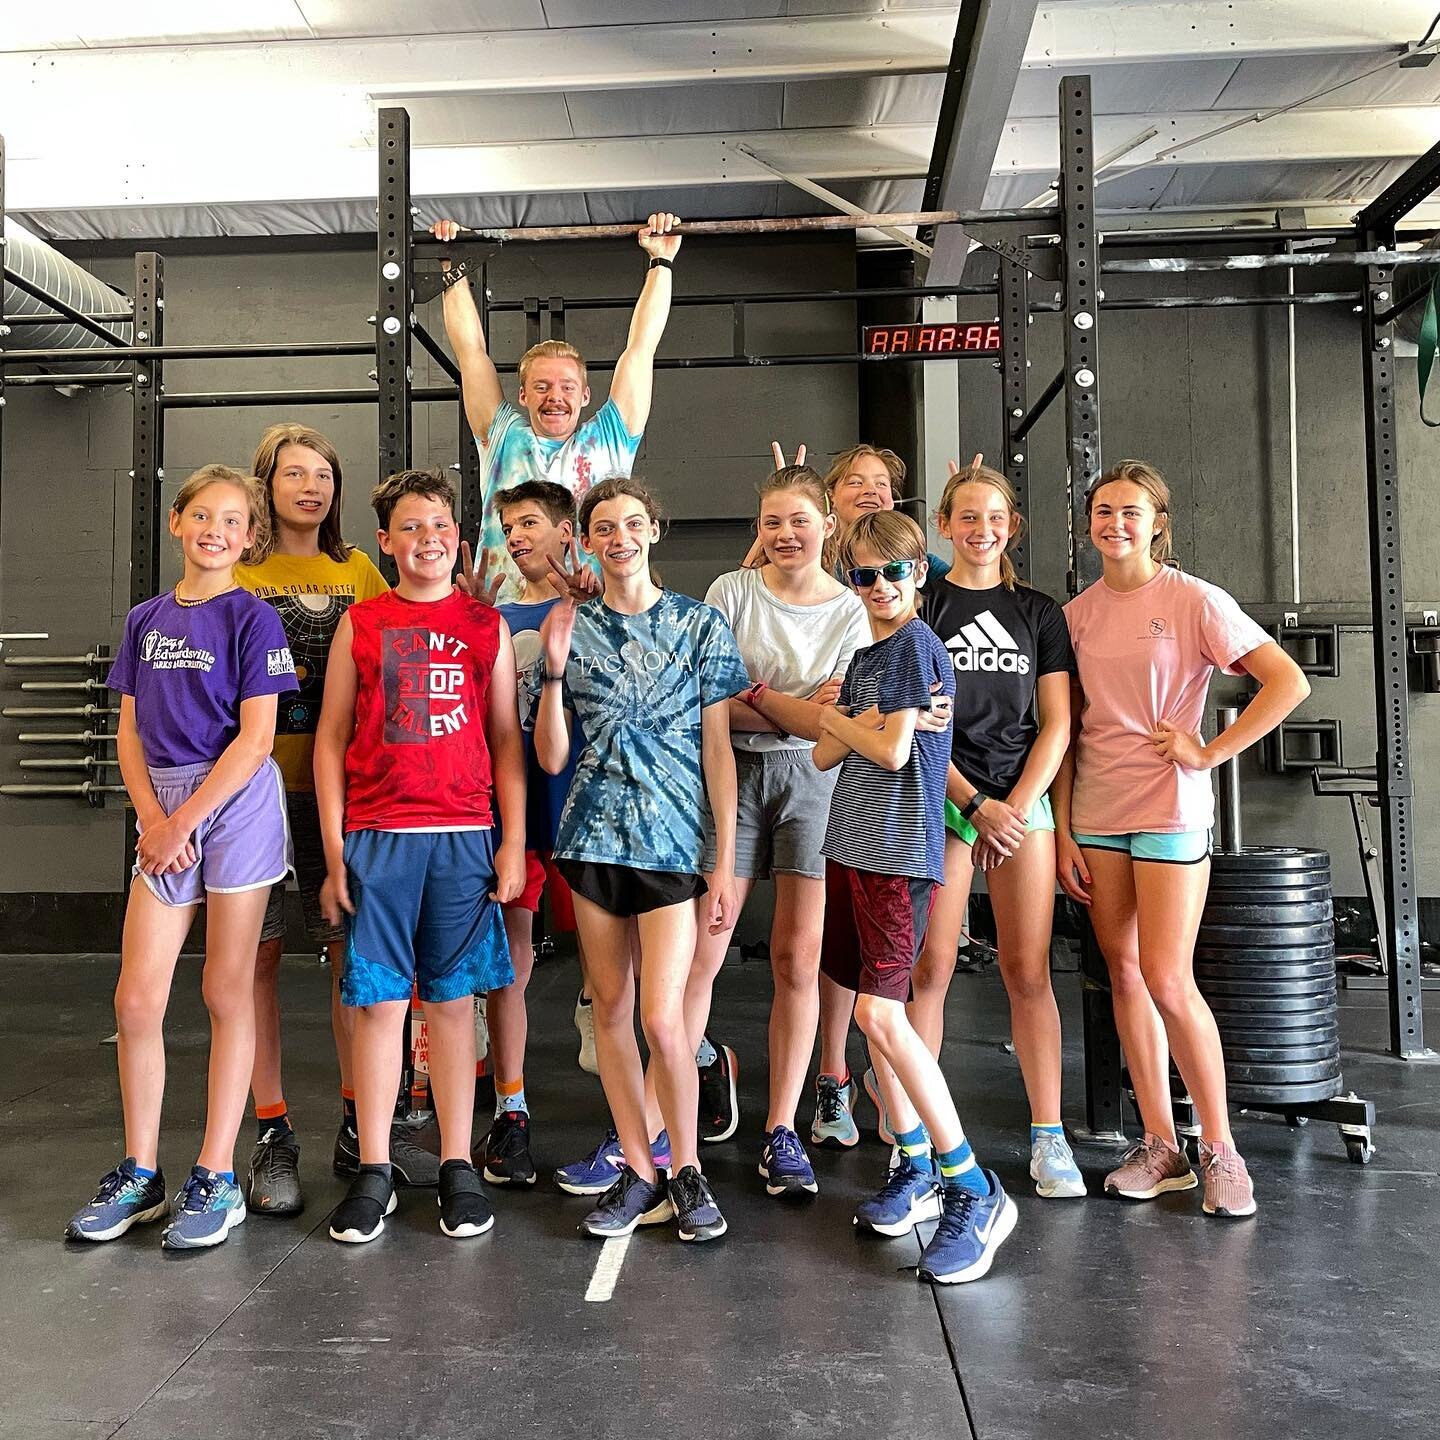 Friday Fitness w/ these Cats! @ninjacatsfitness \\ 
Coach: @rickydambacher 

Interested in joining our next summer session starting in a week? DM now! 
#edwardsville #ninjacats ##kidsfitness #KidsWholift #youthweightlifting #youthfitness #weightlifti